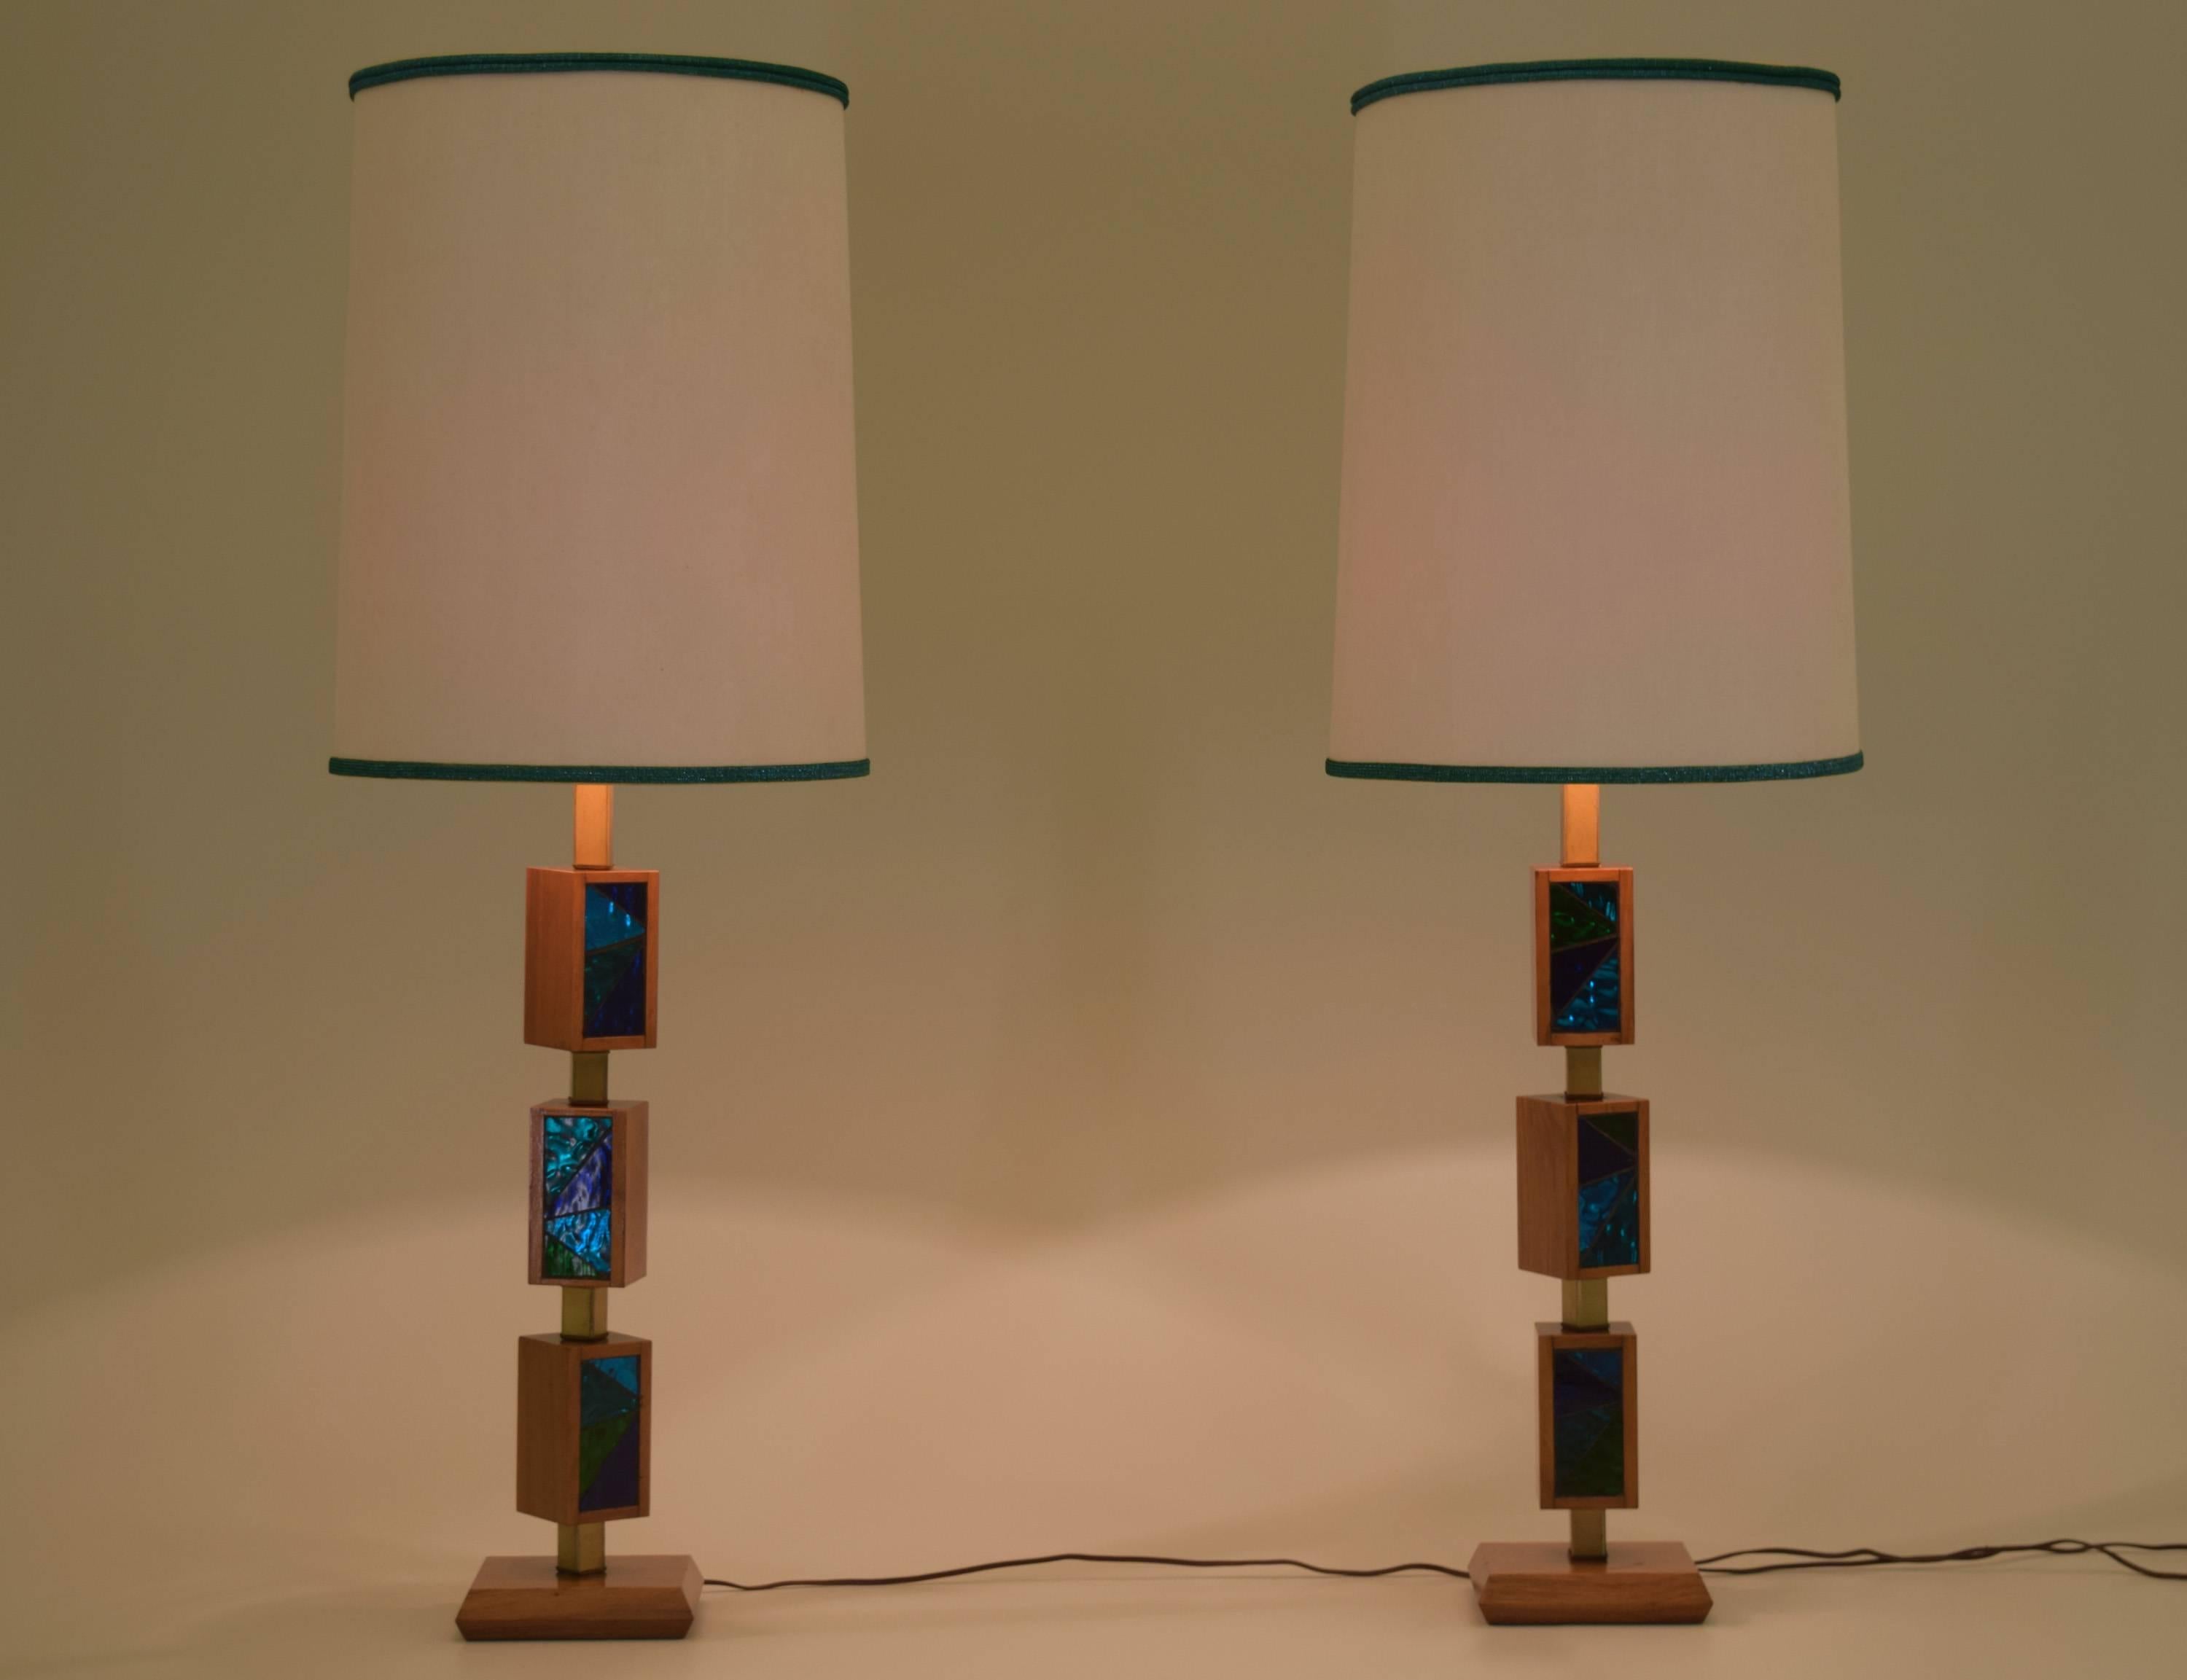 Price is for the pair.

An outstanding pair of lamps designed by Georges Briard with a Danish modern flair. Featuring rotating rectangular boxes with iridescent mosaic glass designs in dynamic blue hues. The boxes can be positioned to suit the